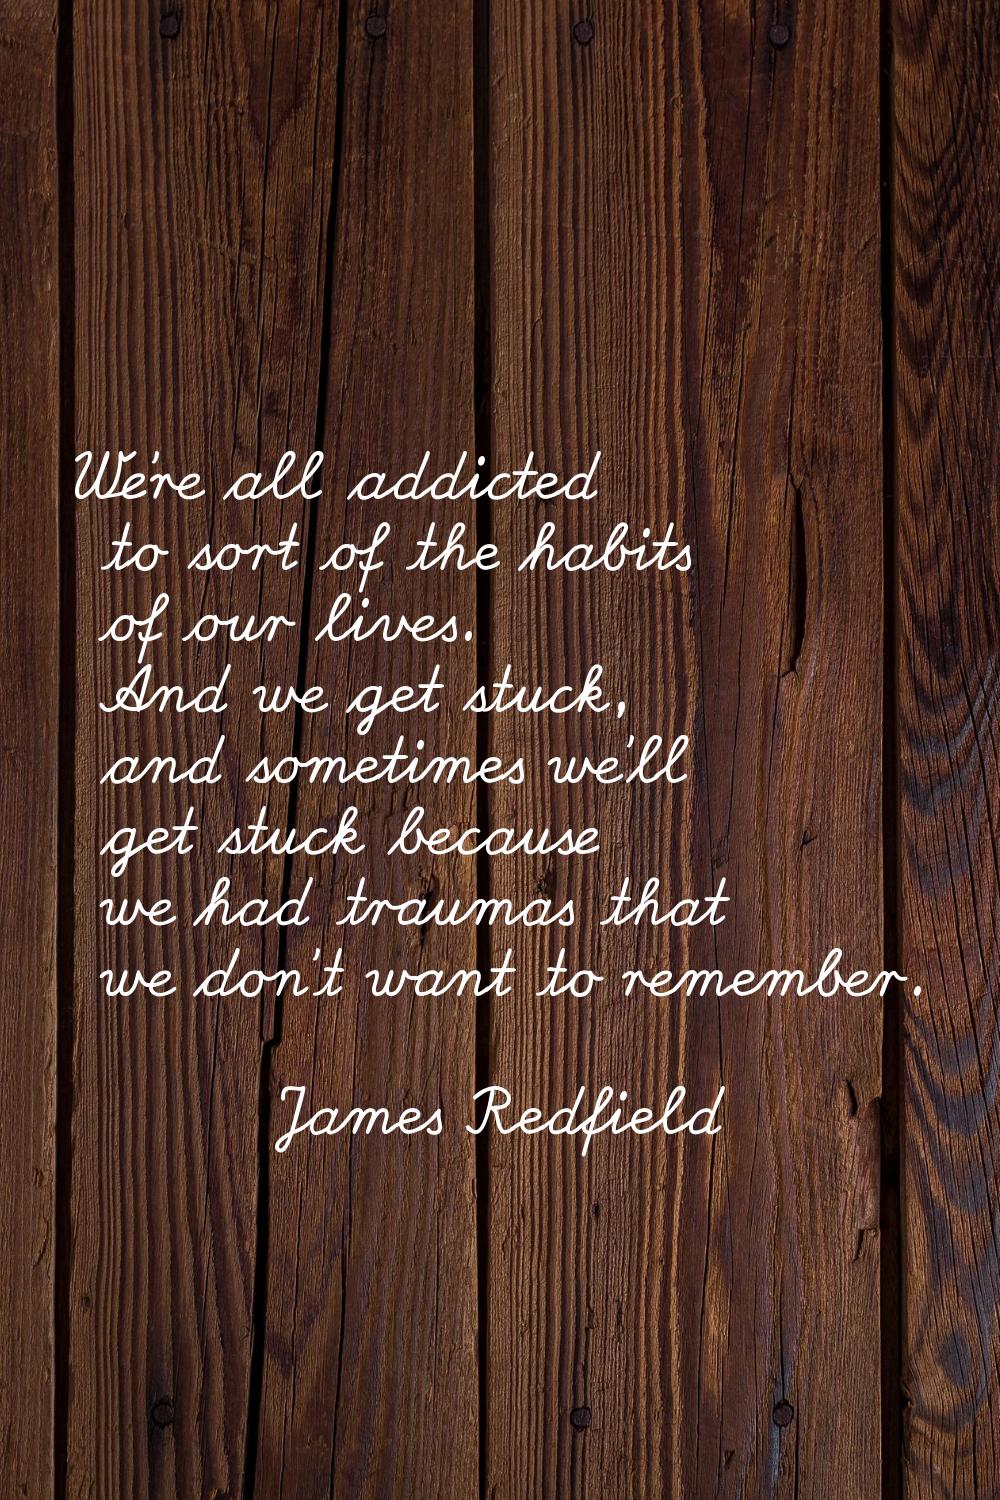 We're all addicted to sort of the habits of our lives. And we get stuck, and sometimes we'll get st